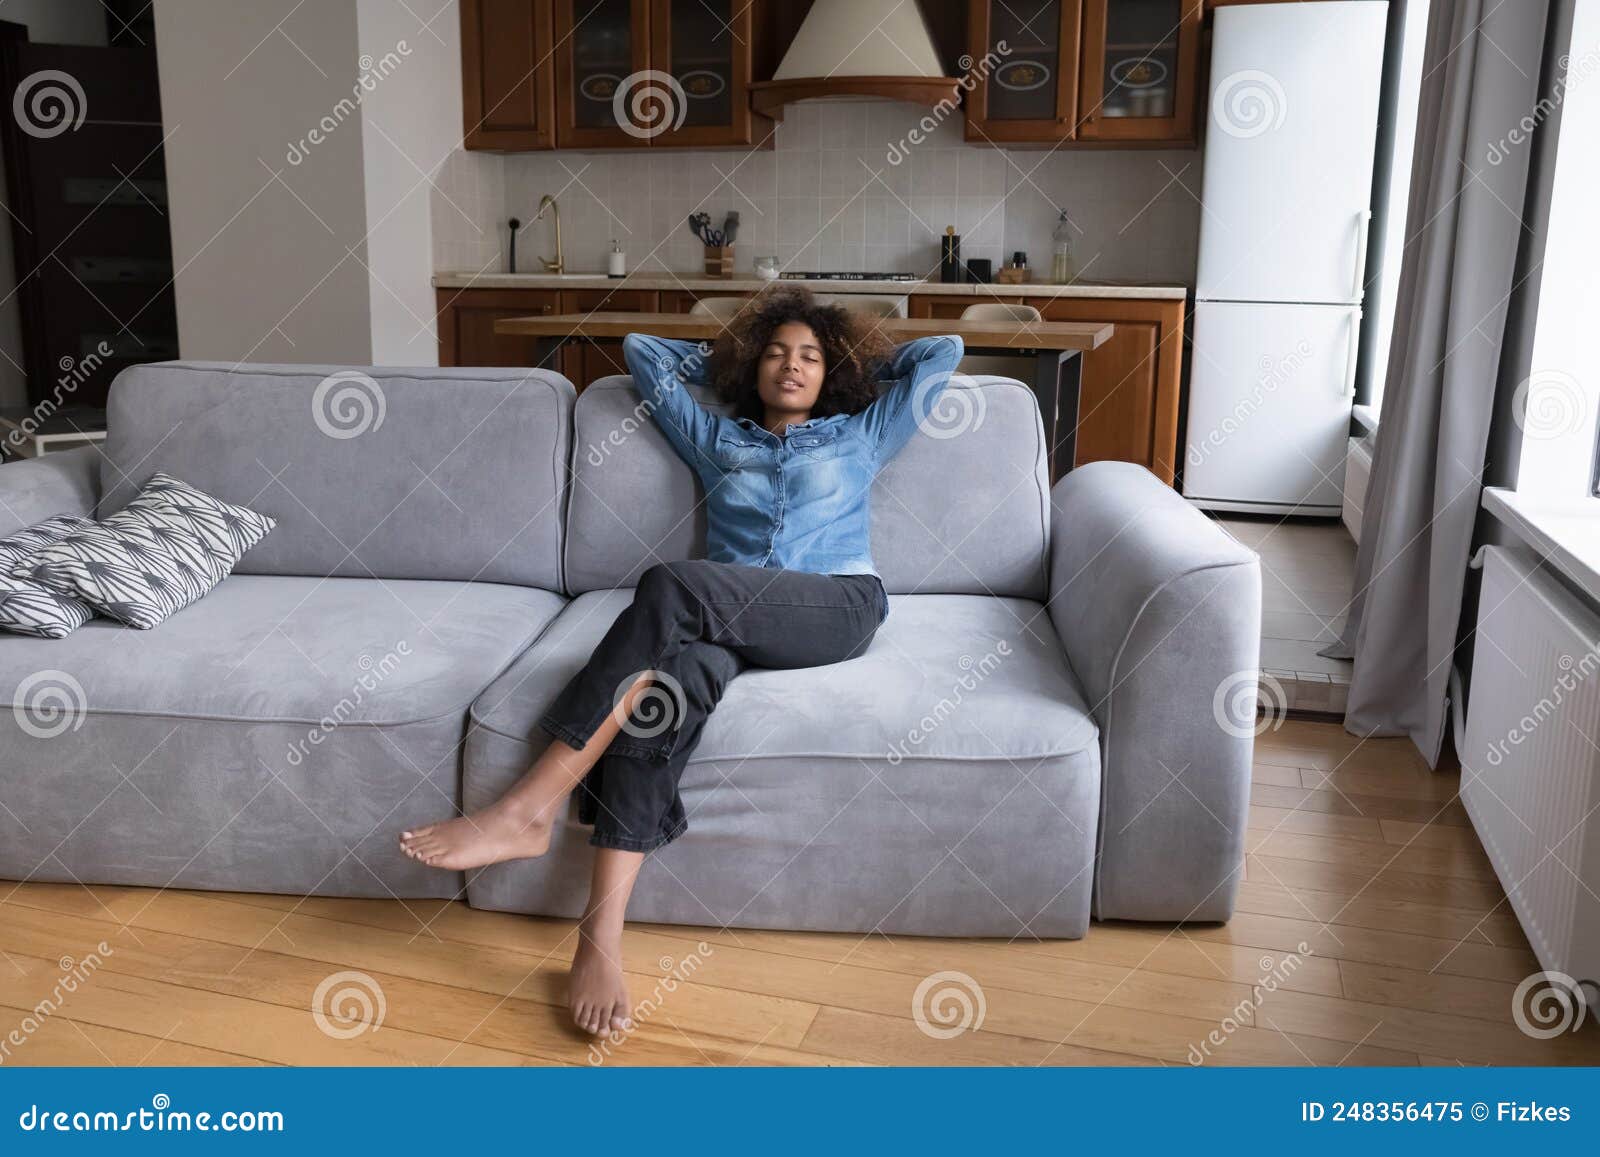 charlie don add couch for teens photo